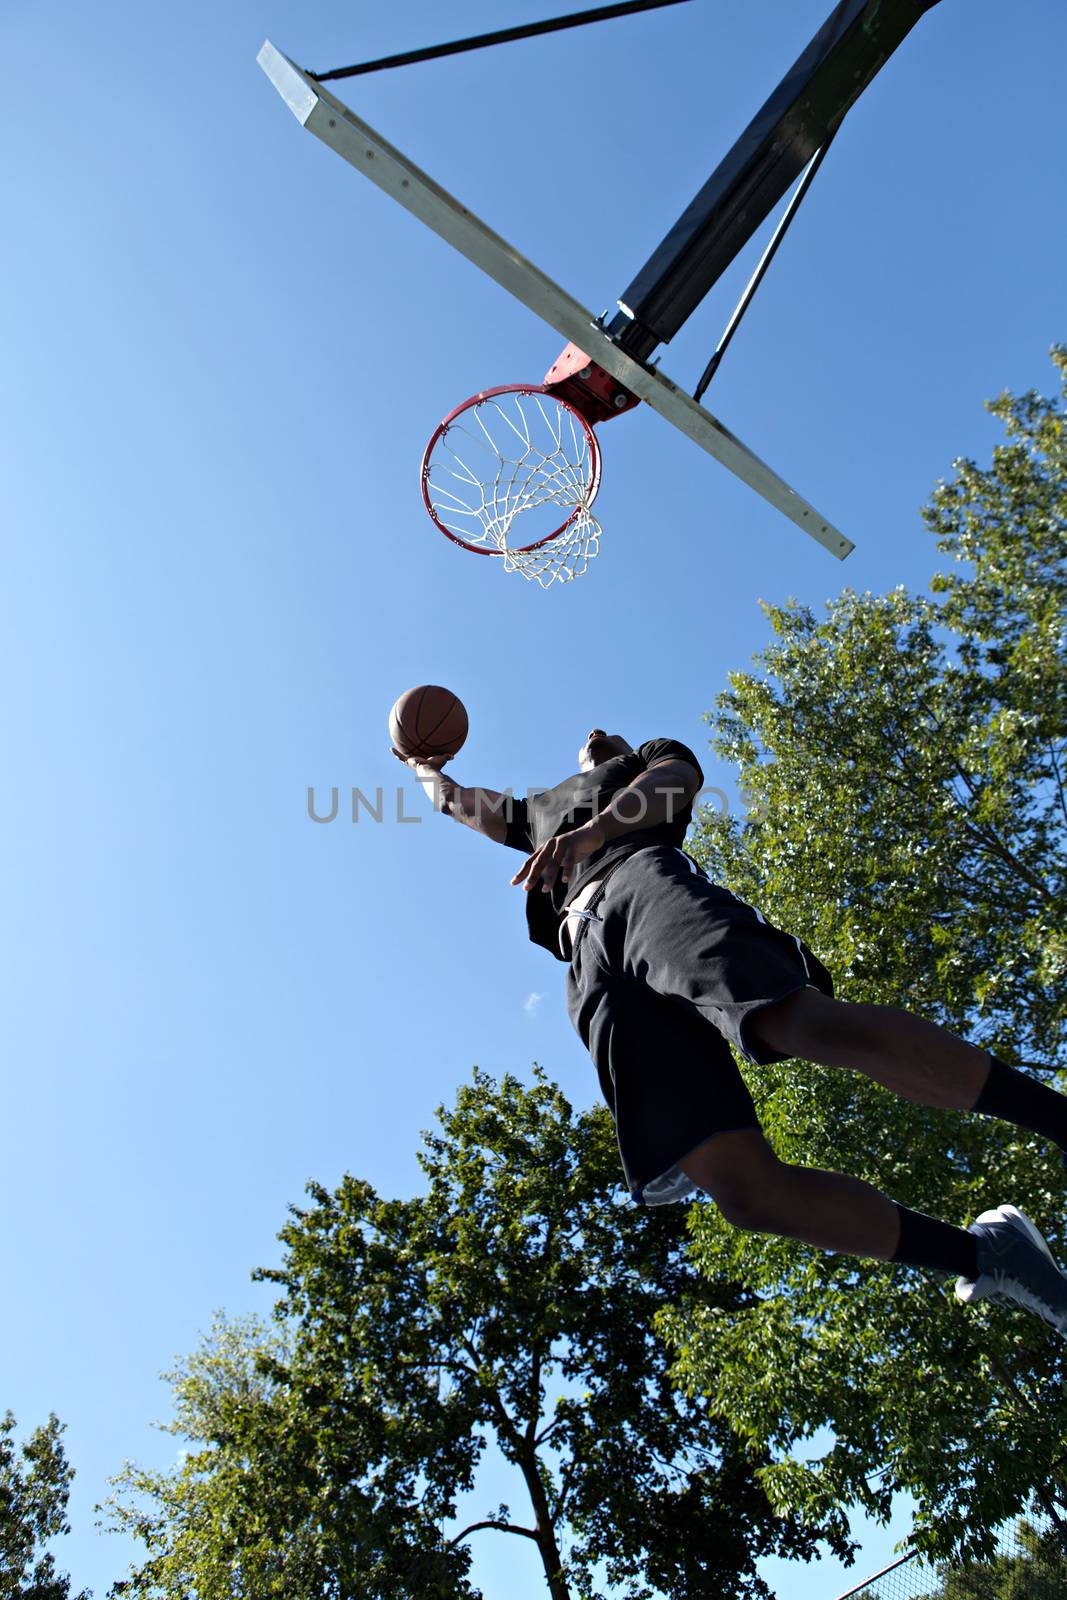 Young basketball player driving to the hoop for a high flying slam dunk.